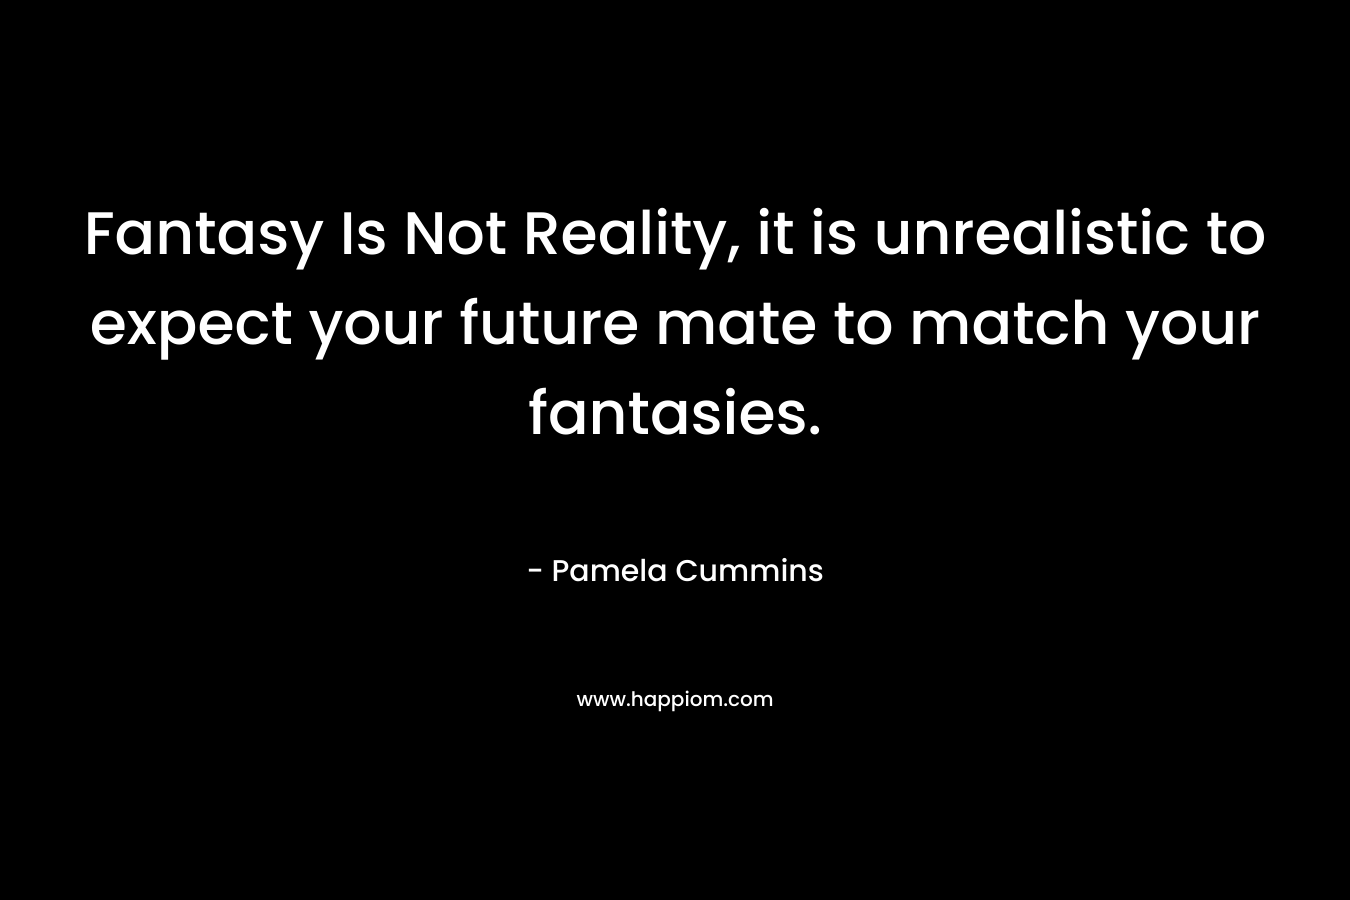 Fantasy Is Not Reality, it is unrealistic to expect your future mate to match your fantasies.